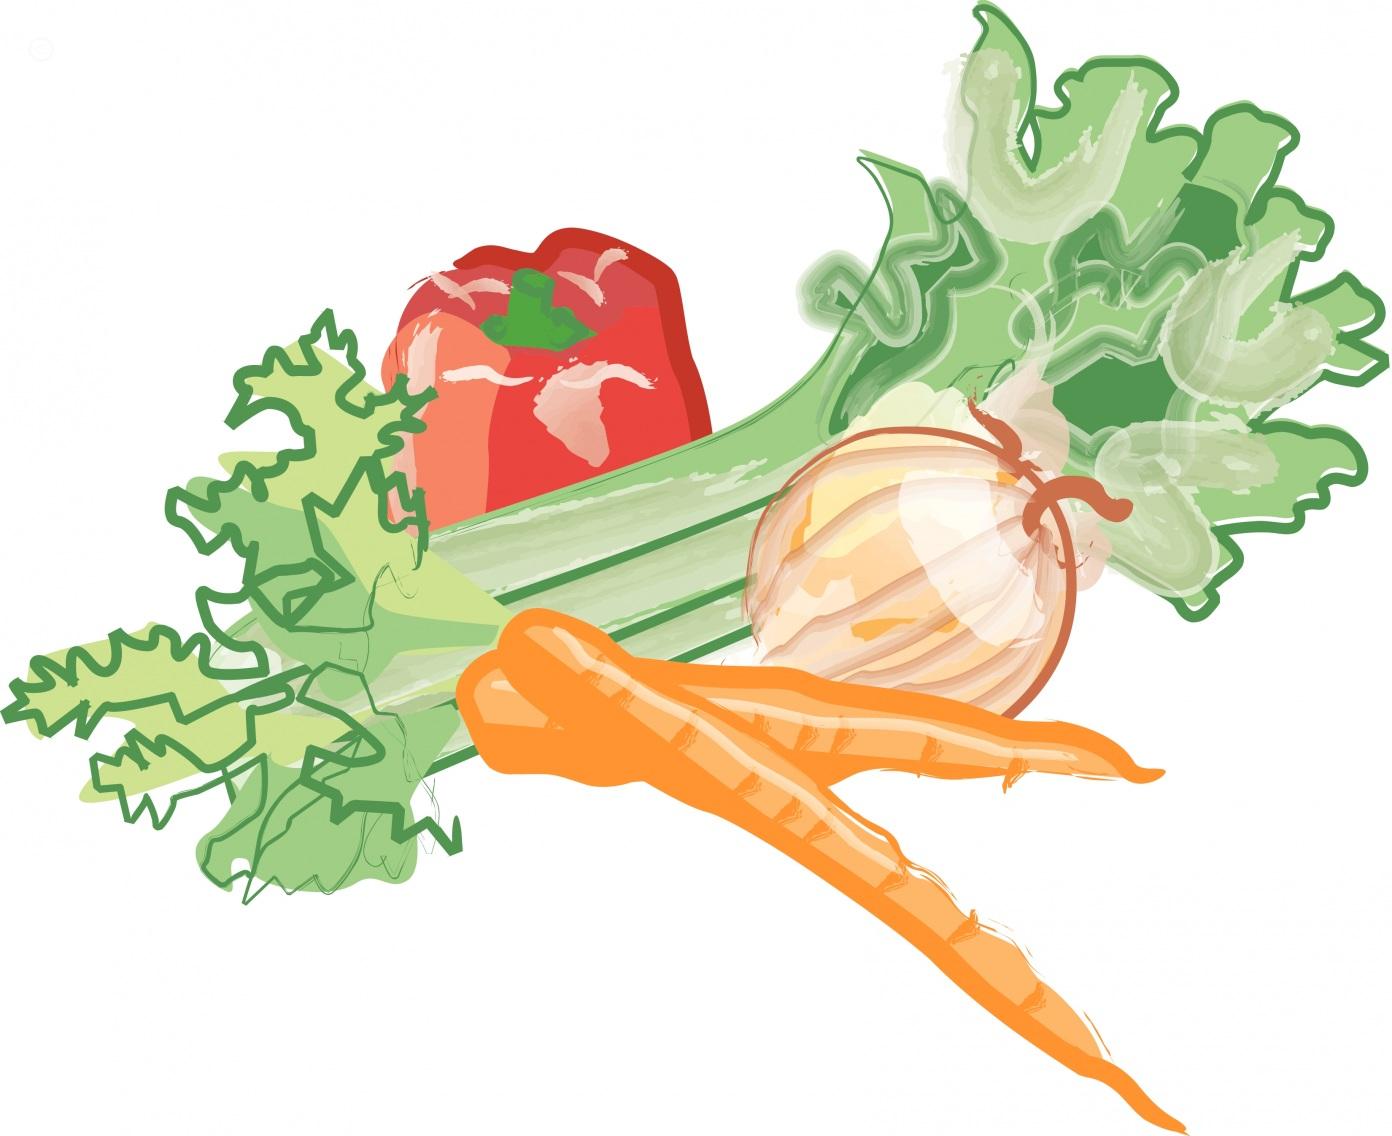 green vegetables clipart - photo #49